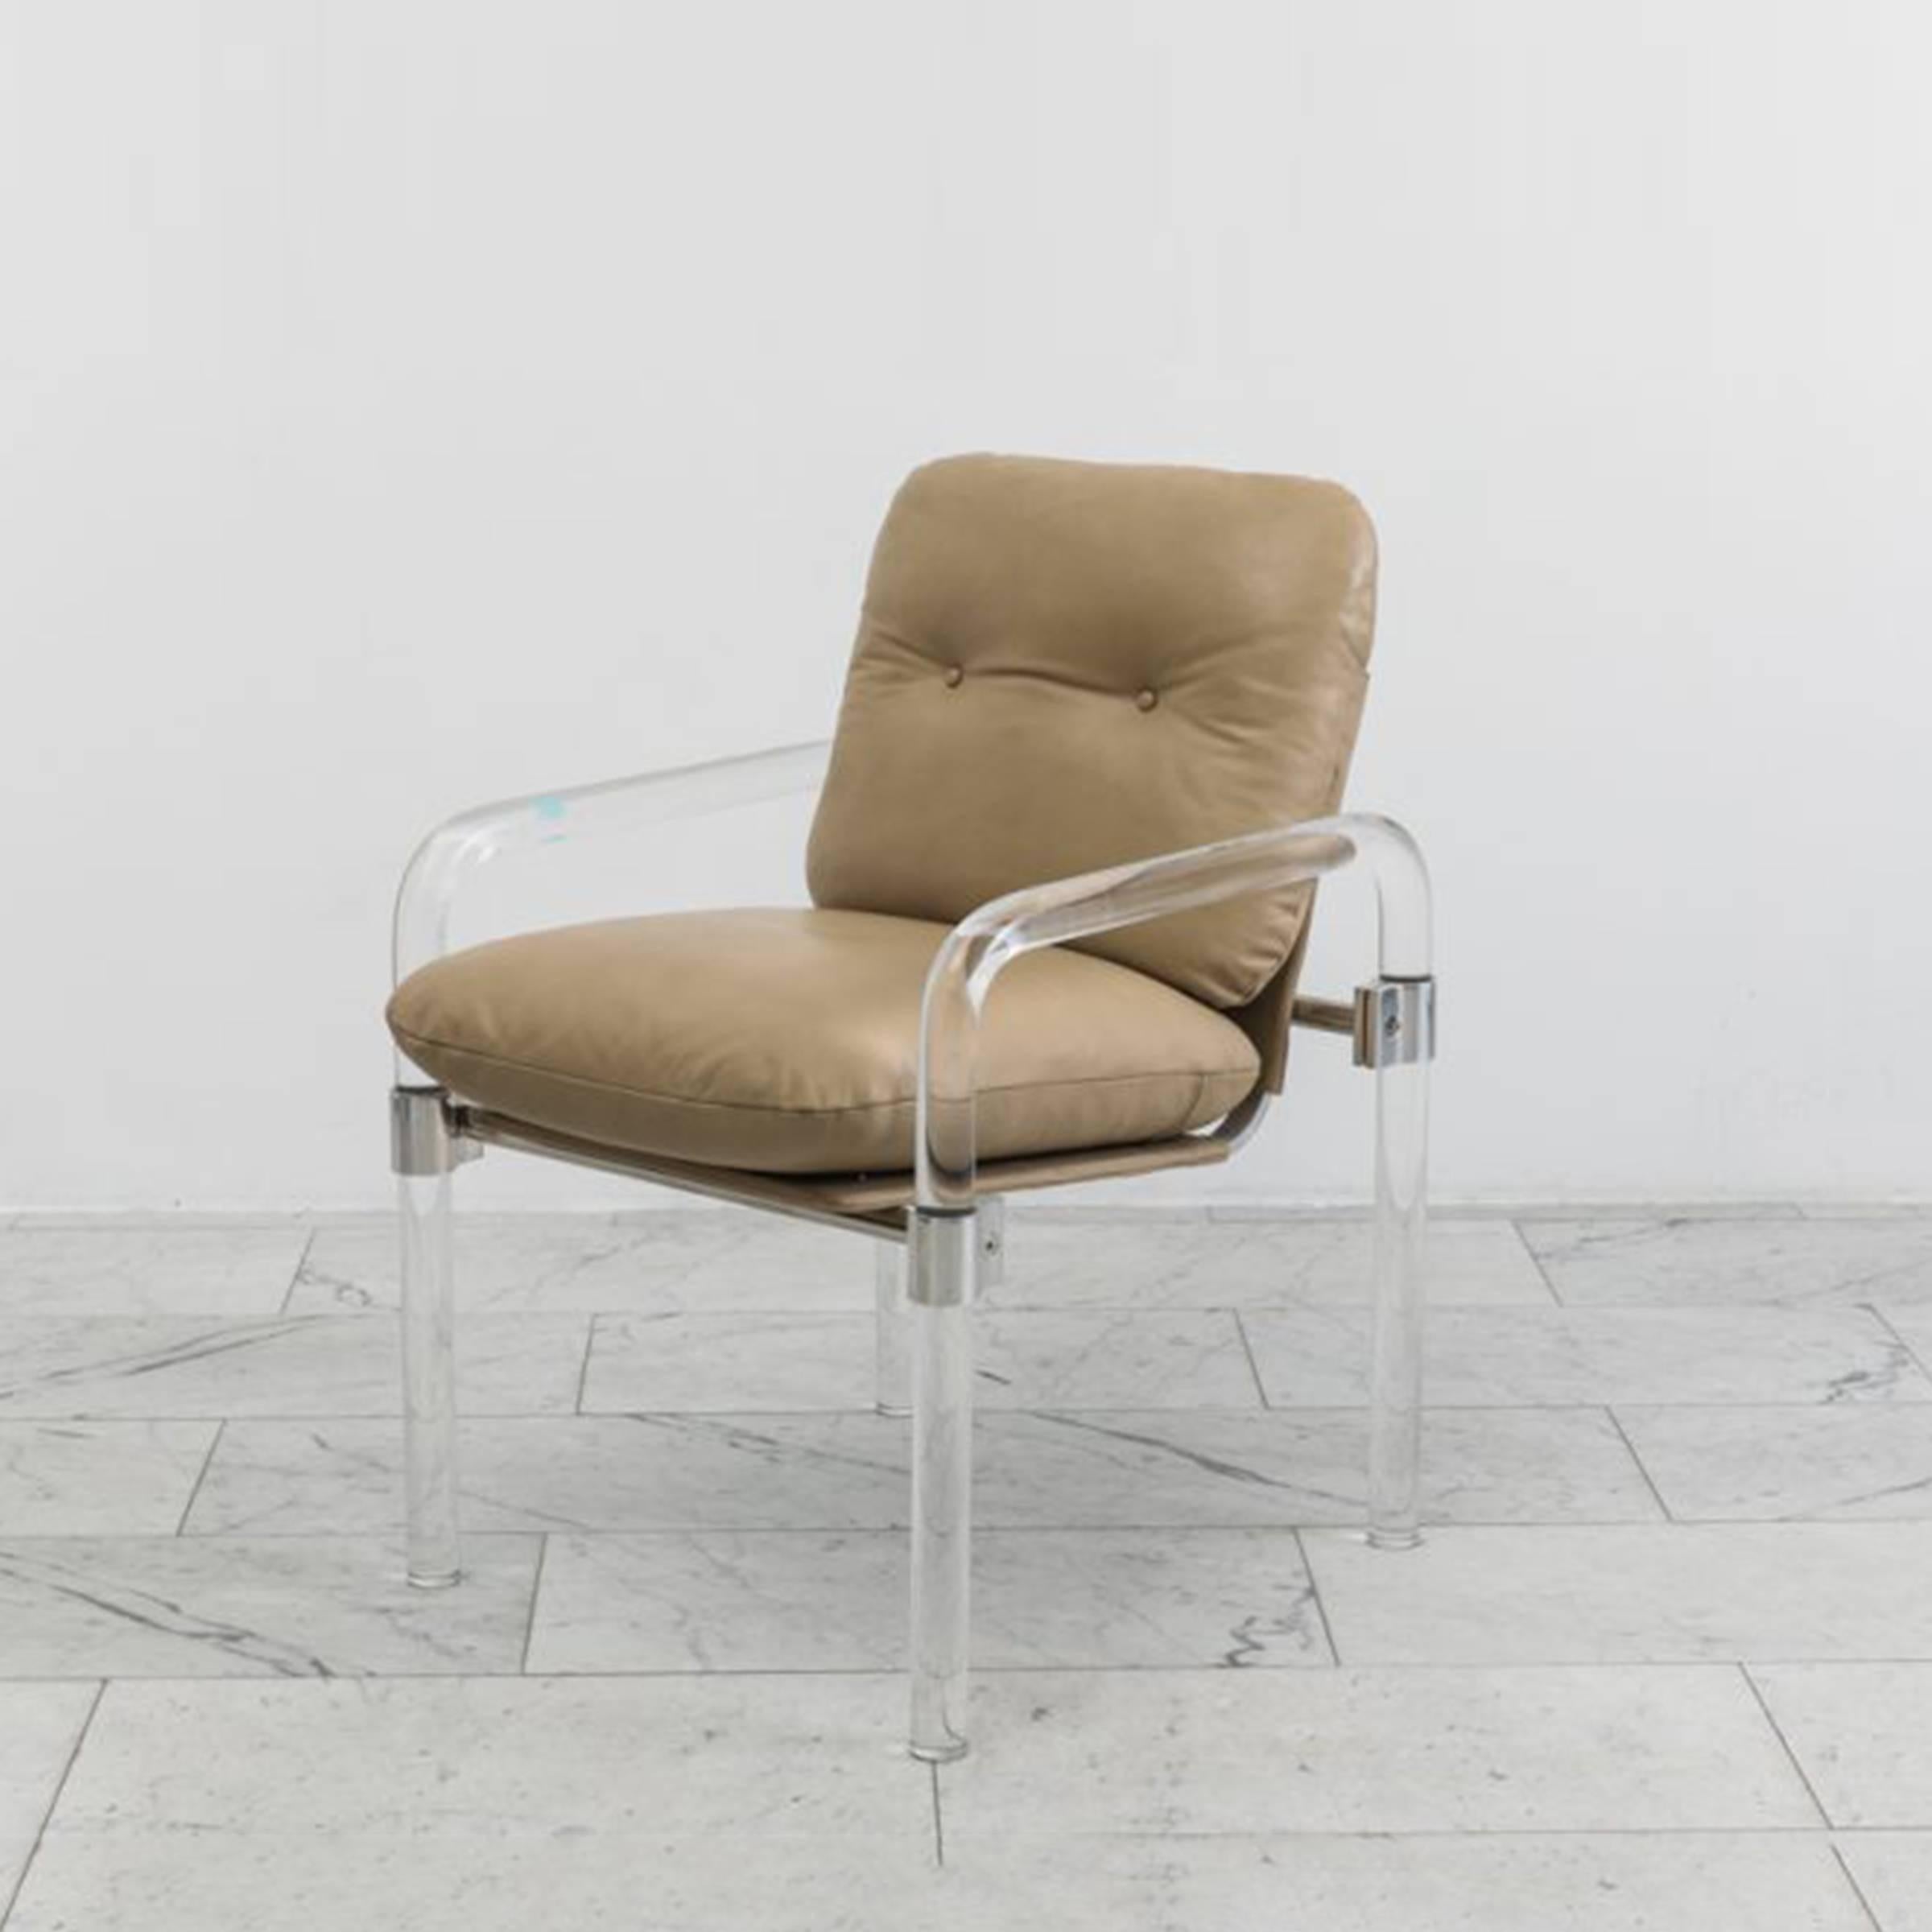 Set of six Lucite and aluminum “Pipeline Series II” armchairs with taupe leather upholstery by Jeff Messerschmidt, American, 1982.  Constructed of thick acrylic pipe connected by polished aluminum brackets, each chair is signed, dated and